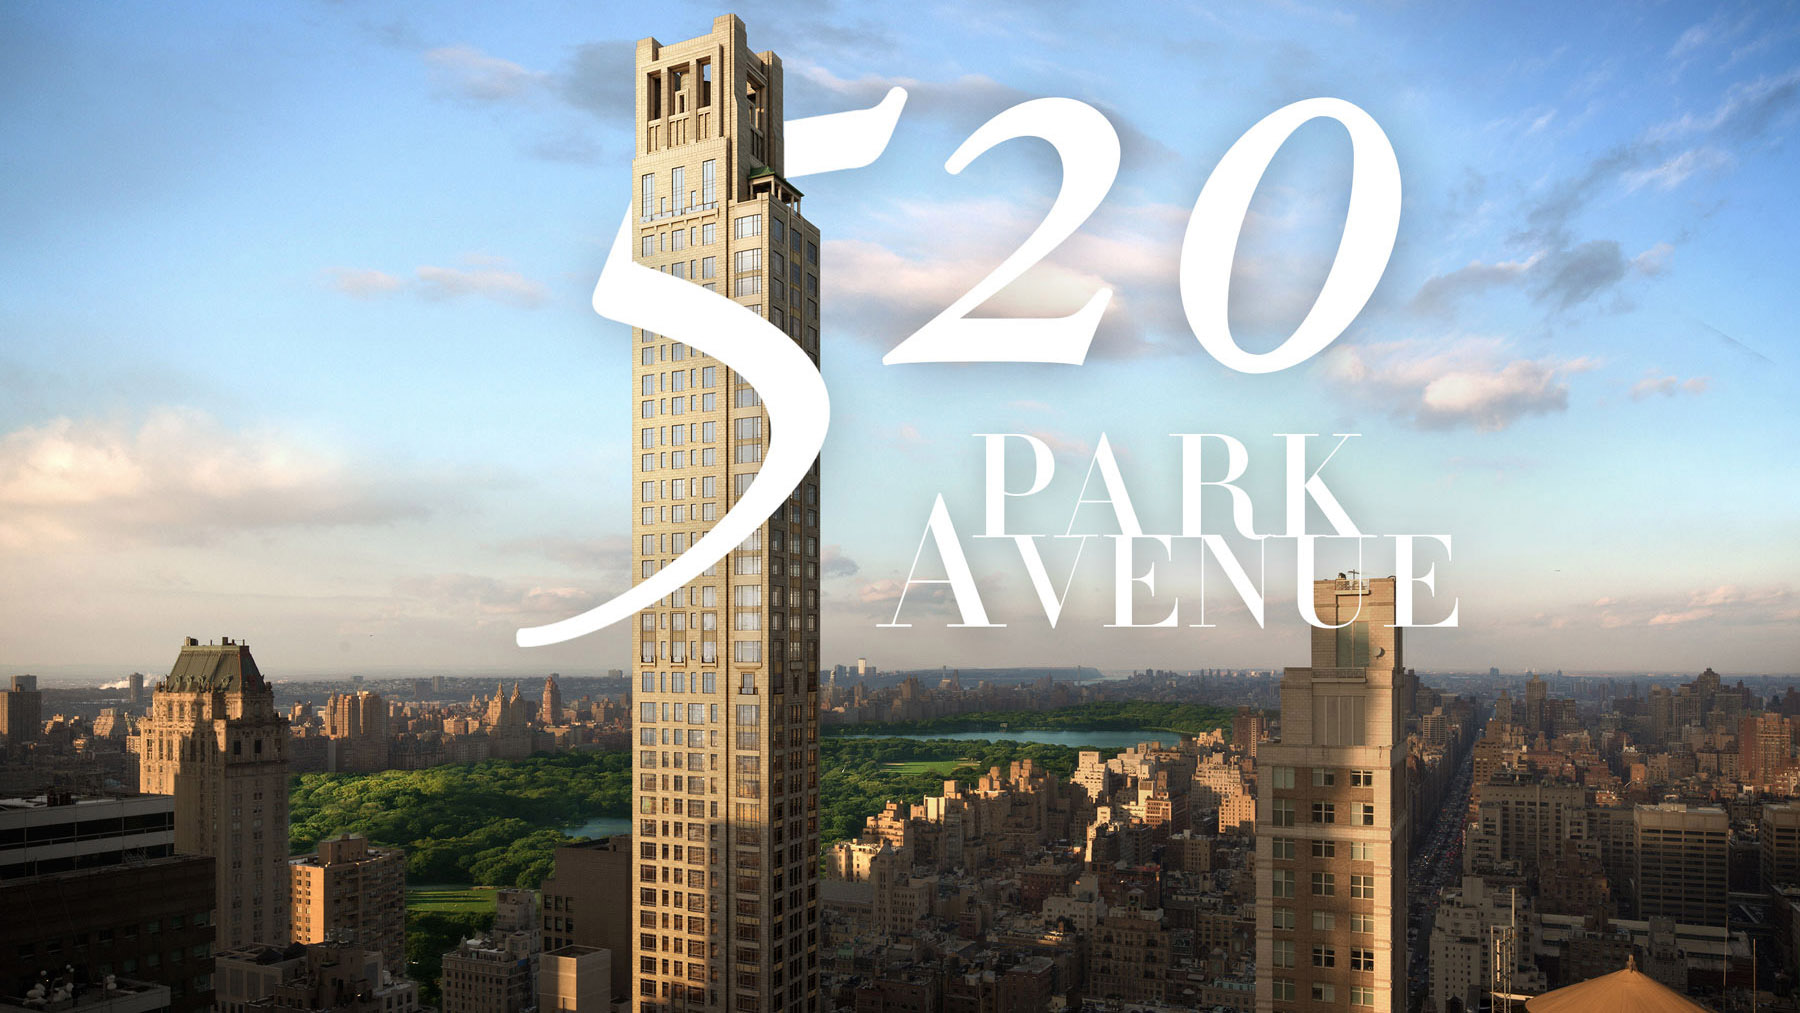 $130 Million 520 Park Ave Penthouse - The Most Expensive Condo Listing in New York